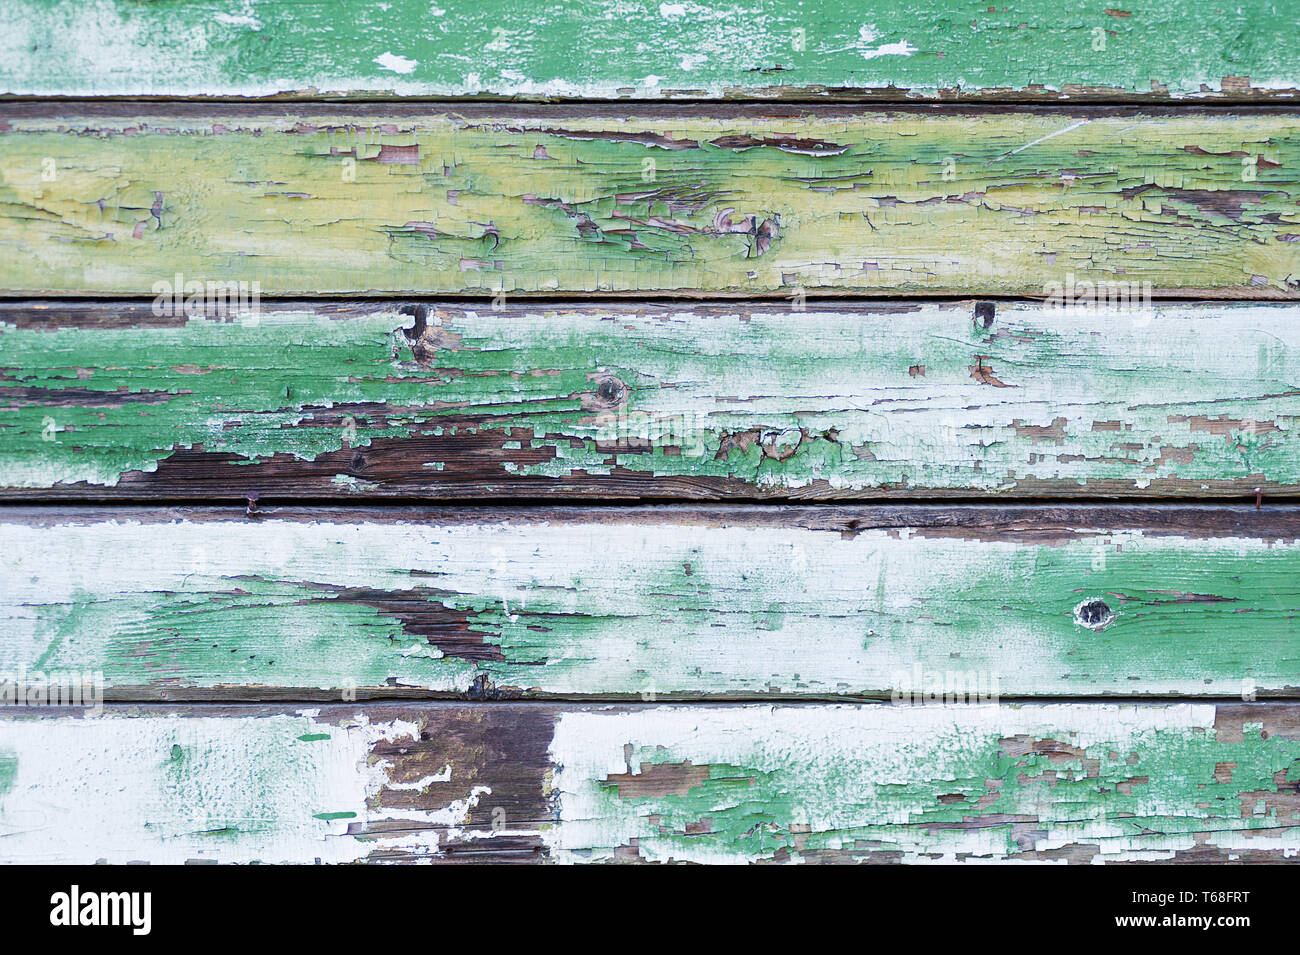 Green Stained Wood Stock Photos and Pictures - 38,291 Images